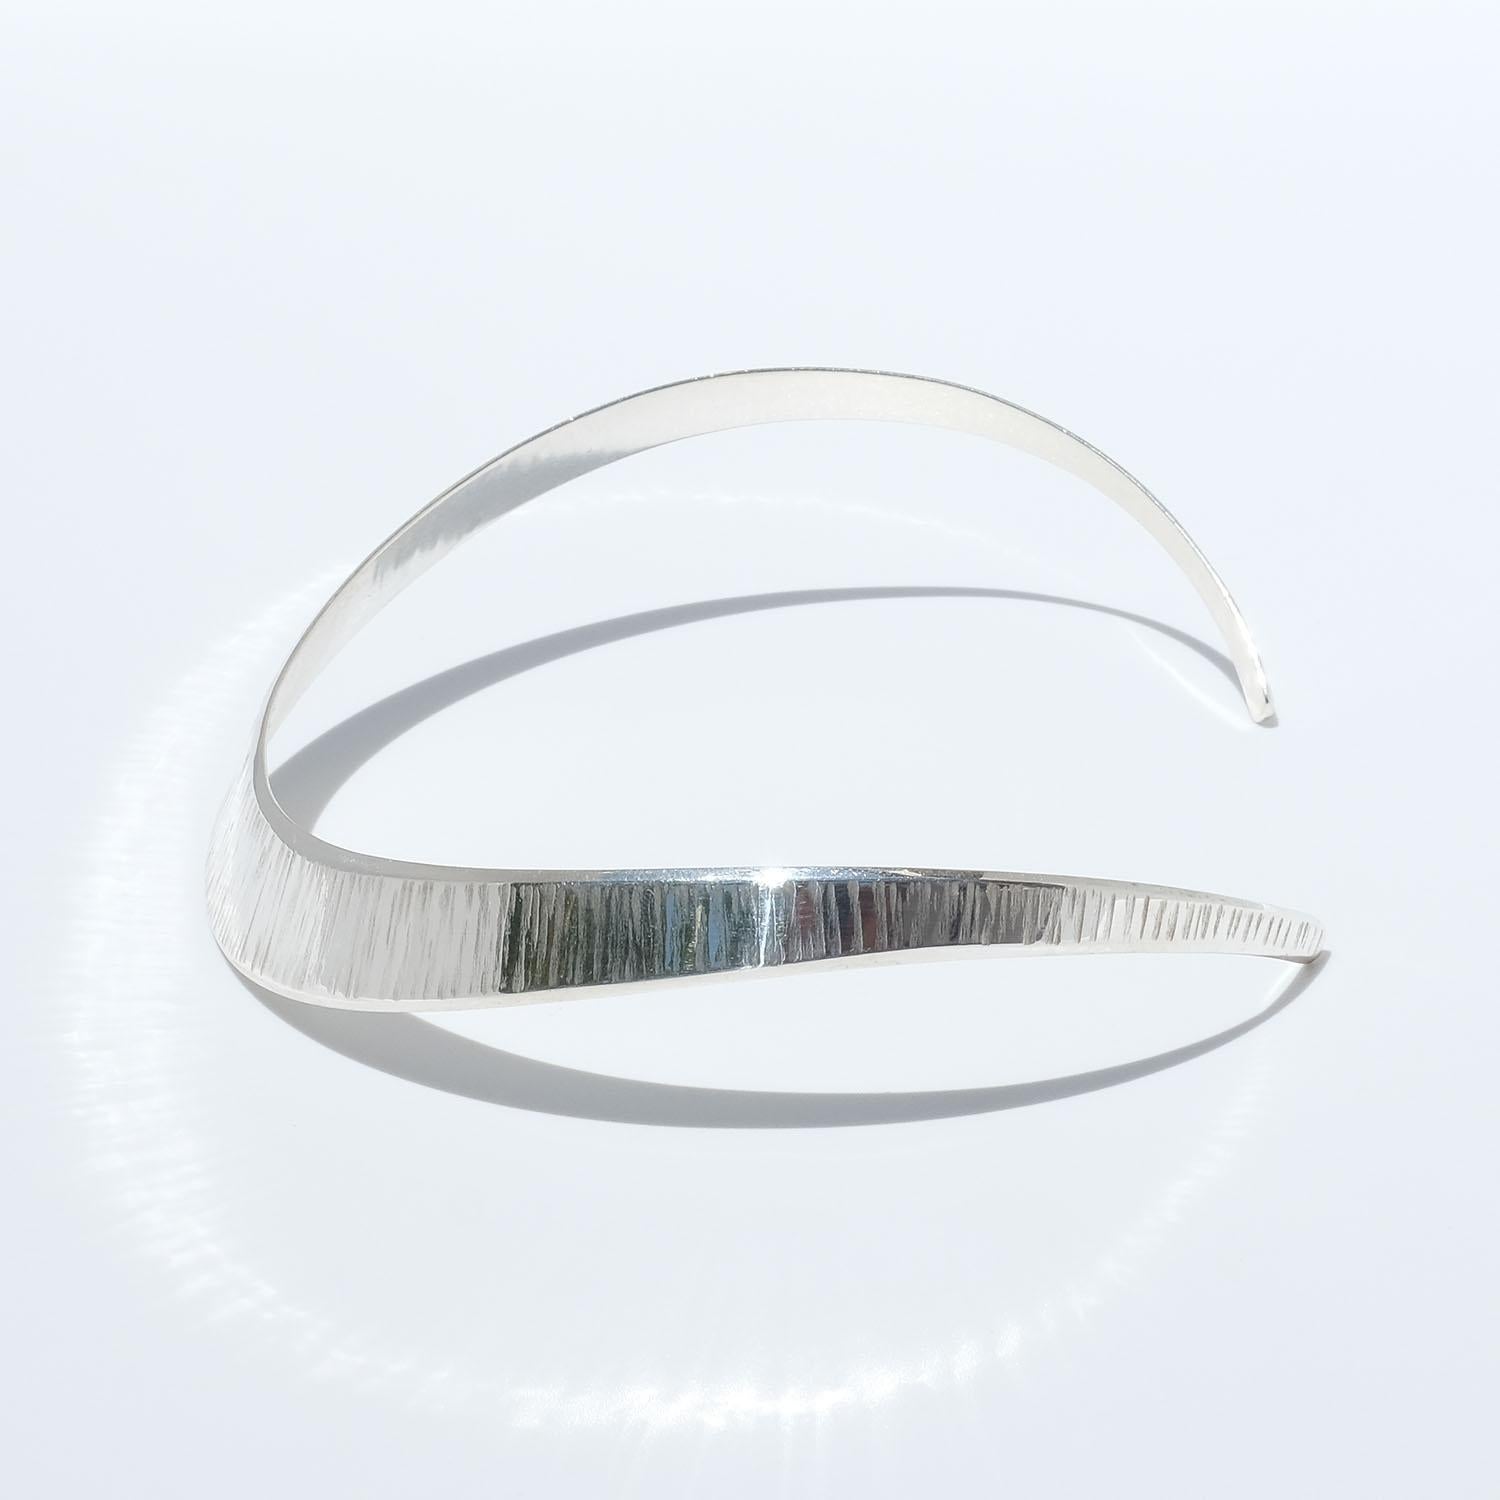 Vintage Silver Neck Ring by Alton Made Year 1973 In Good Condition For Sale In Stockholm, SE